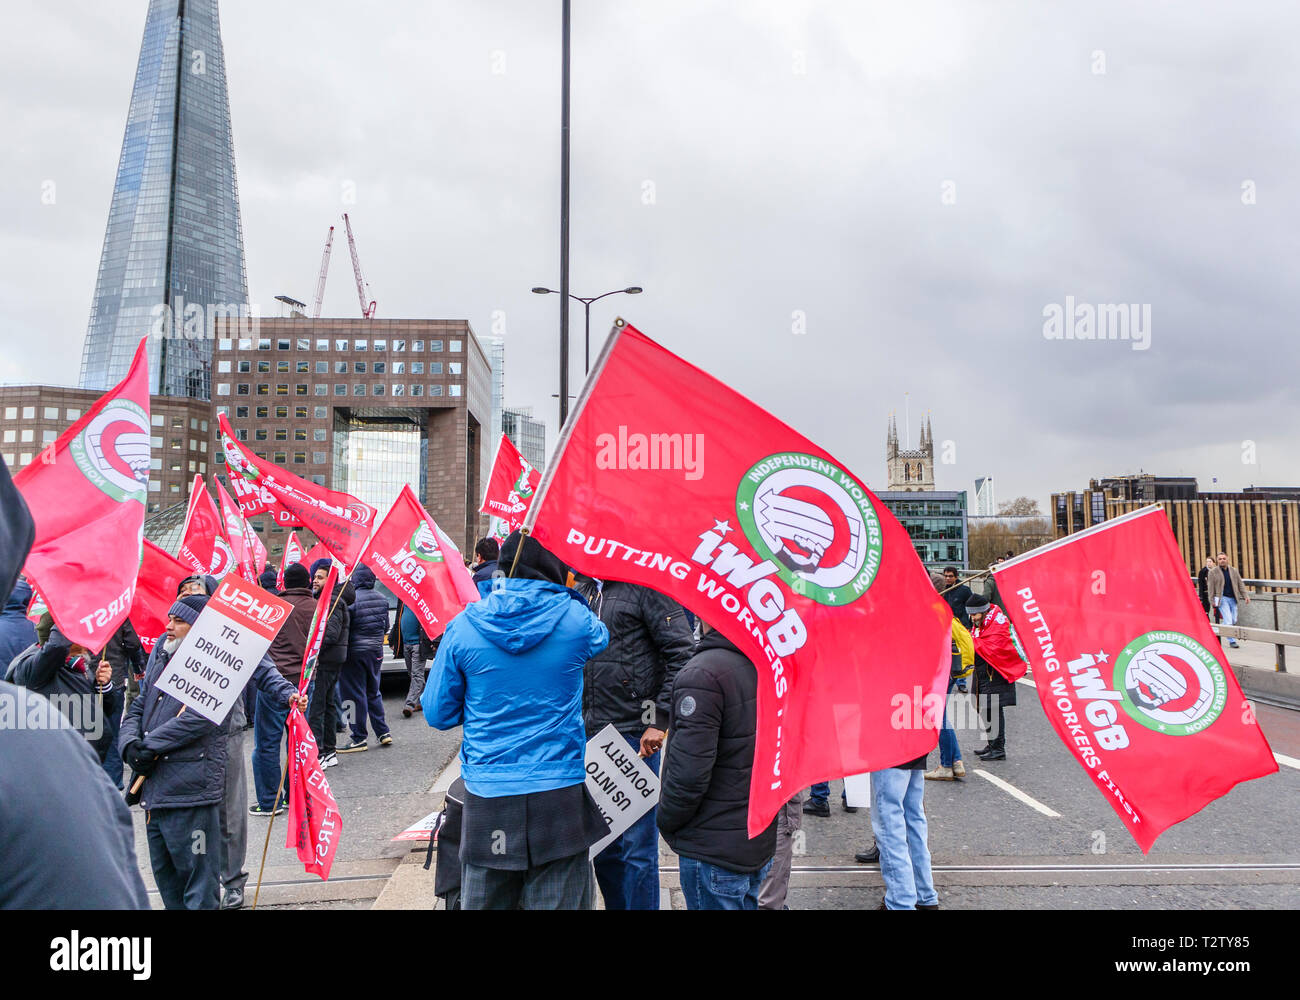 London, UK, 04th April 2019. Minicab drivers block the road on London Bridge protesting against the congestion change on private hire minicabs.  The demonstrators hold and wave flags and placards of UPHD (United Prive Hire Drivers) and IWGB (Independent Workers Union of Great Britain). Credit: Graham Prentice/Alamy Live News Stock Photo